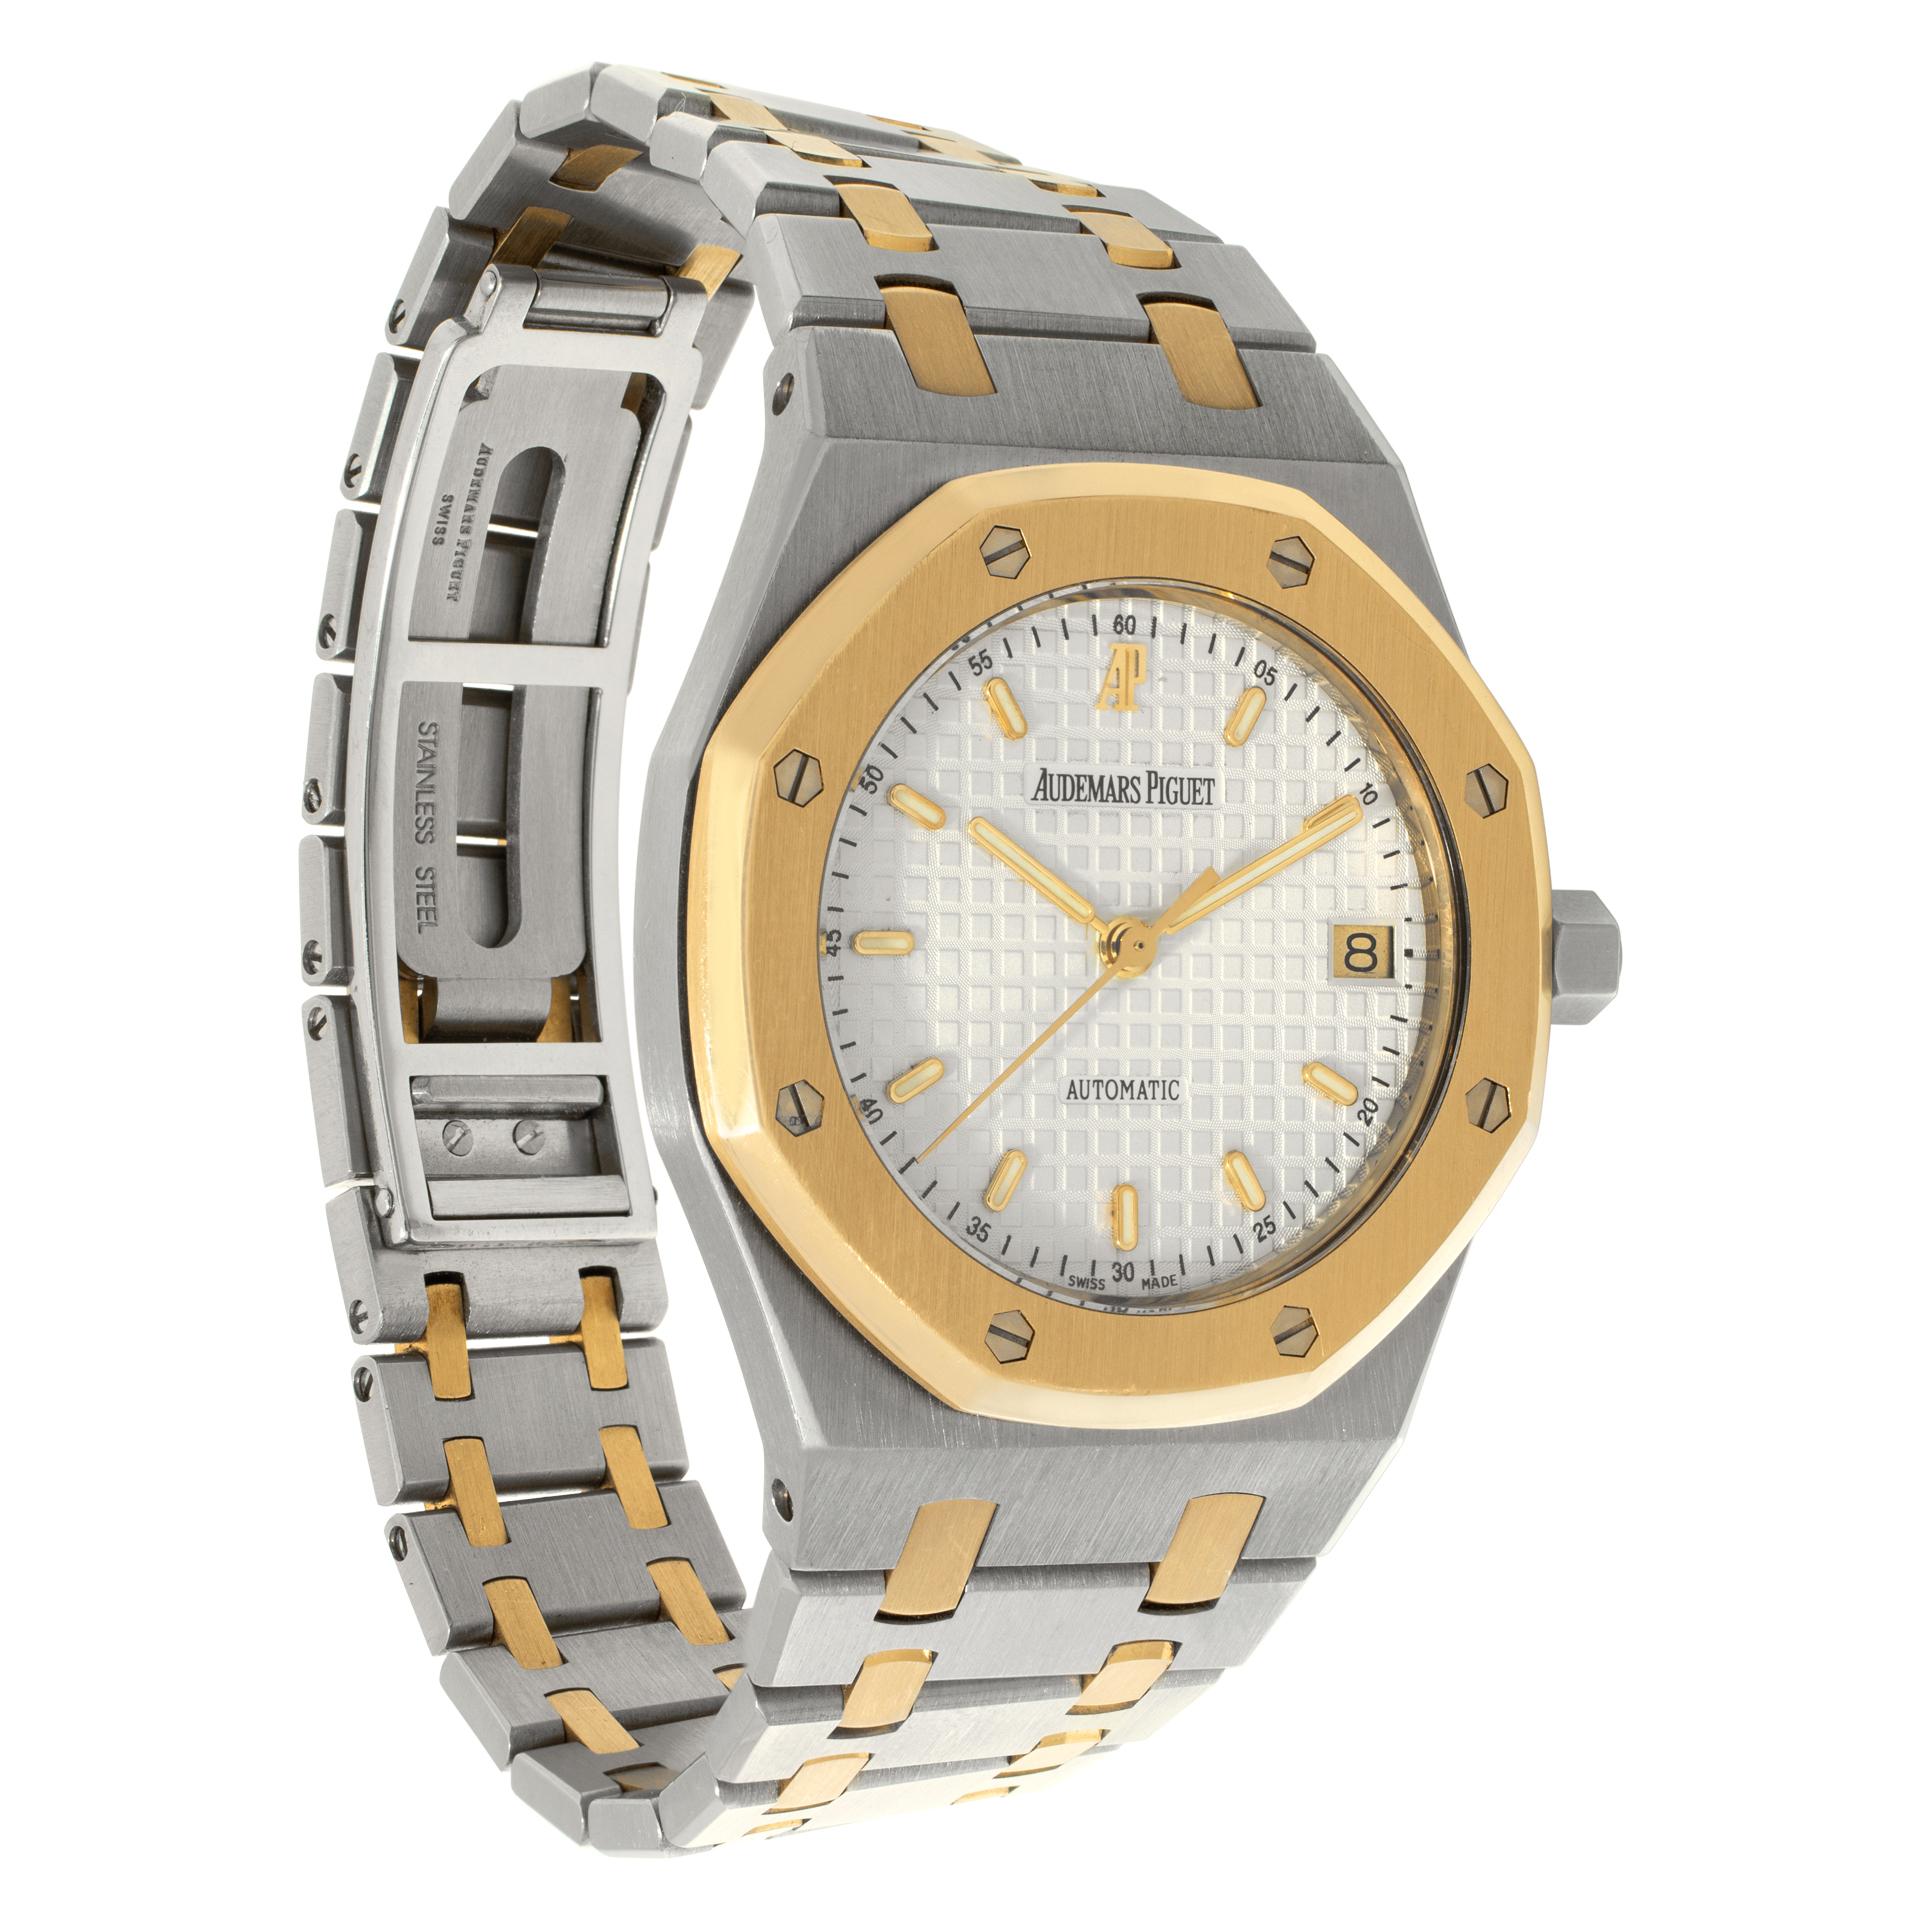 Audemars Piguet Royal Oak 18k yellow gold & stainless steel Automatic Wristwatch In Excellent Condition For Sale In Surfside, FL